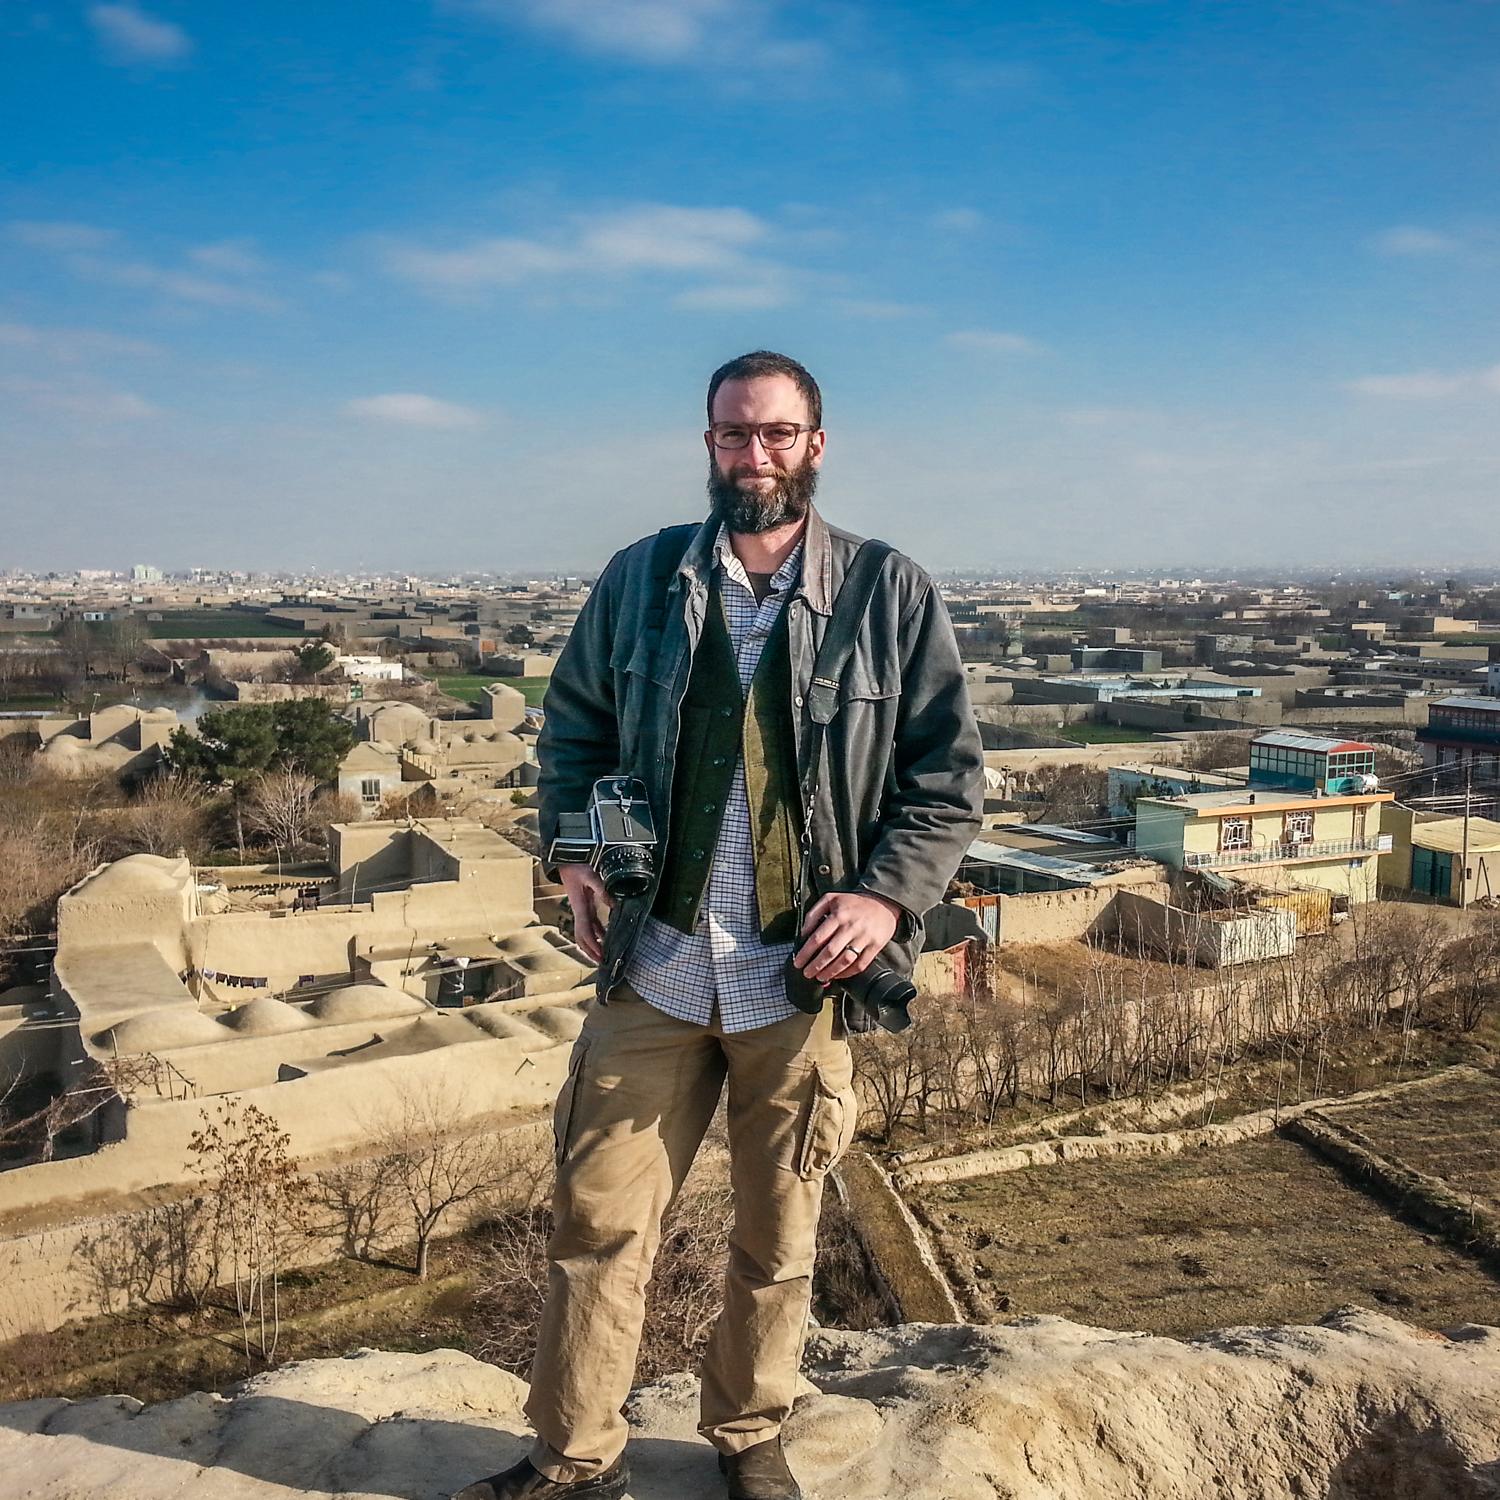 GroundTruth photojournalist Ben Brody on assignment for GroundTruth in Afghanistan